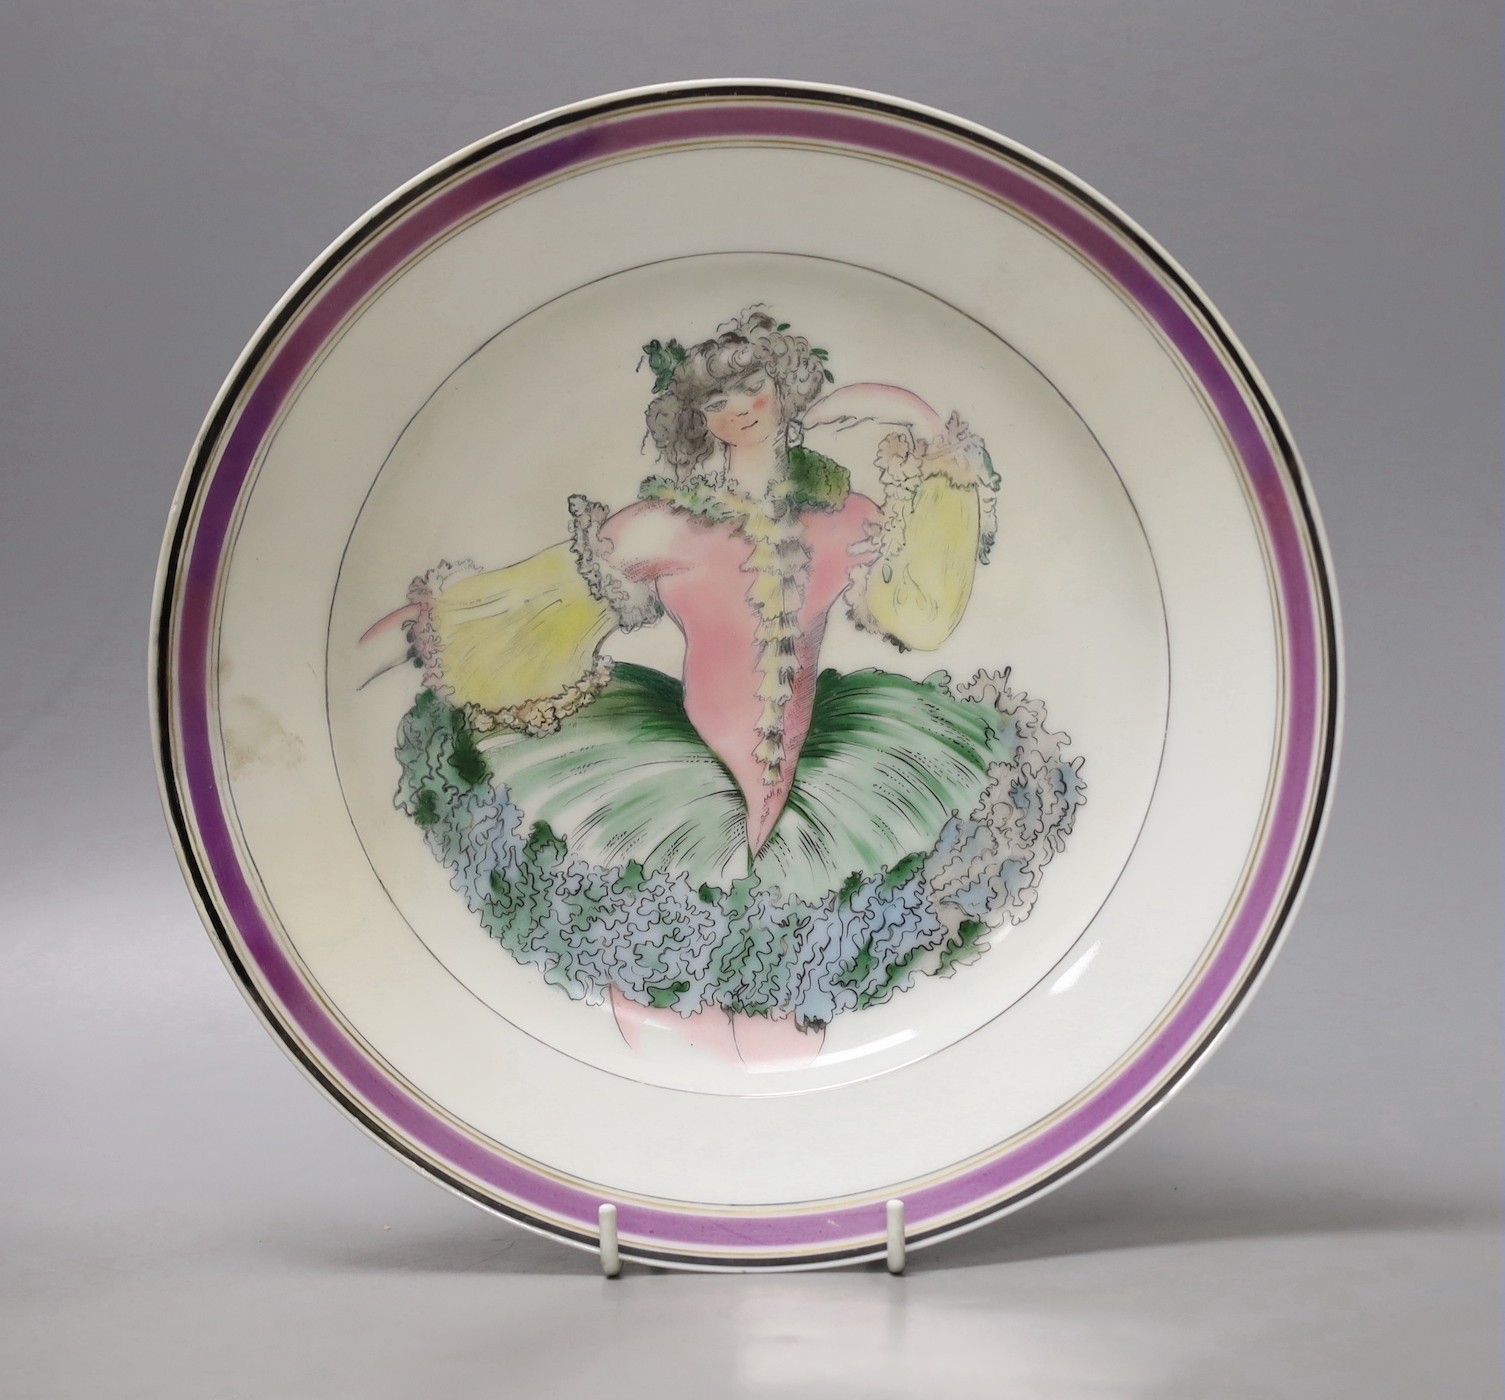 A rare Russian ‘Ballet Russes’ porcelain plate by the Imperial Porcelain Factory, St Petersburg and the State Porcelain Factory, Petrograd 1922, possibly taken from a Leon Bakst design, restored